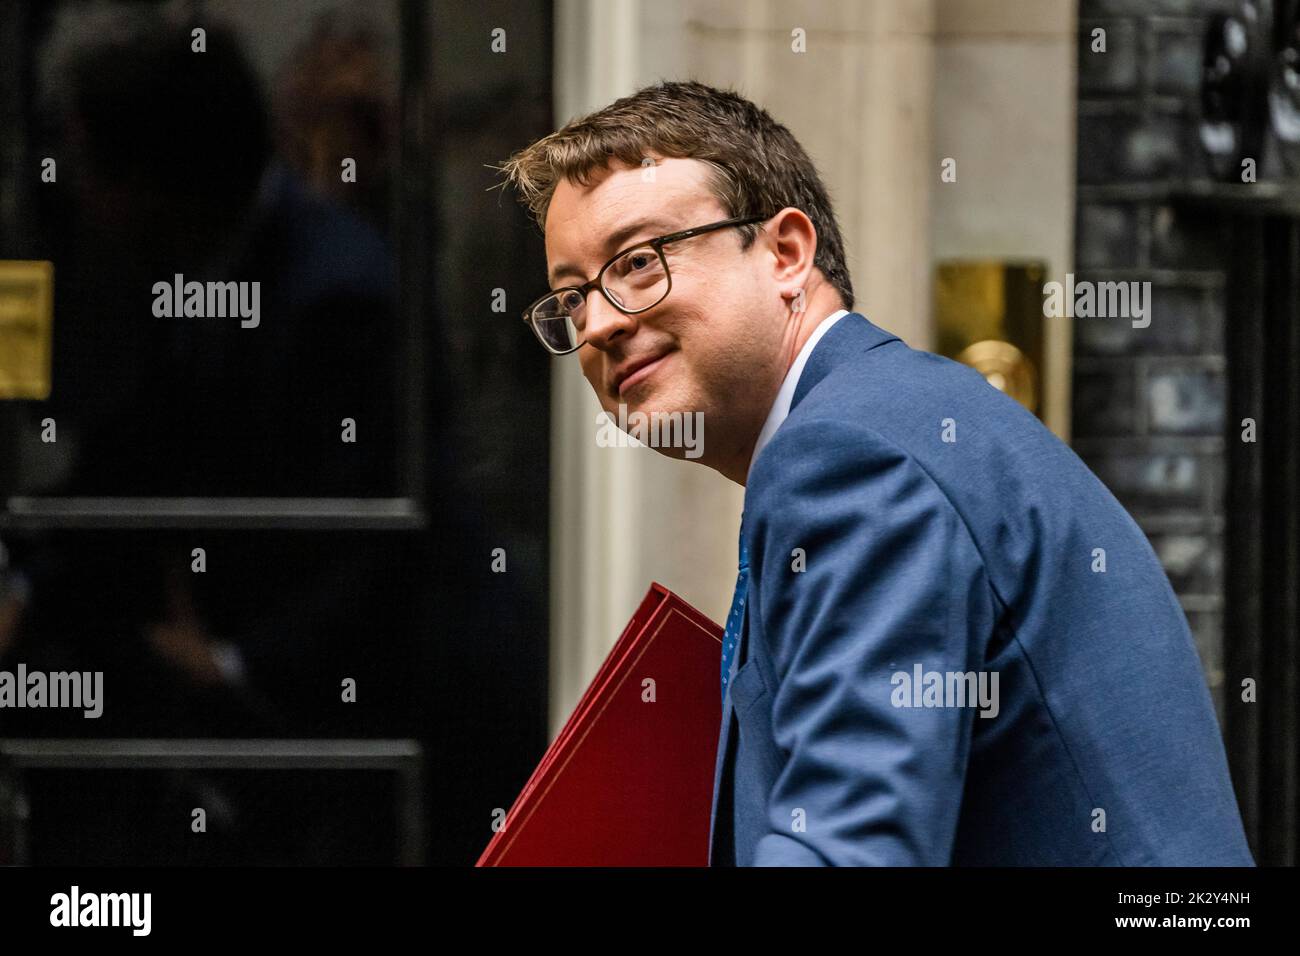 London, UK. 23rd Sep, 2022. Simon Clarke, Secretary of State for Levelling Up, Housing and Communities - Arriving for the Cabinet meeting before The Chancellor leaves Downing Street to make a statement on the government's plans for growth. Credit: Guy Bell/Alamy Live News Stock Photo